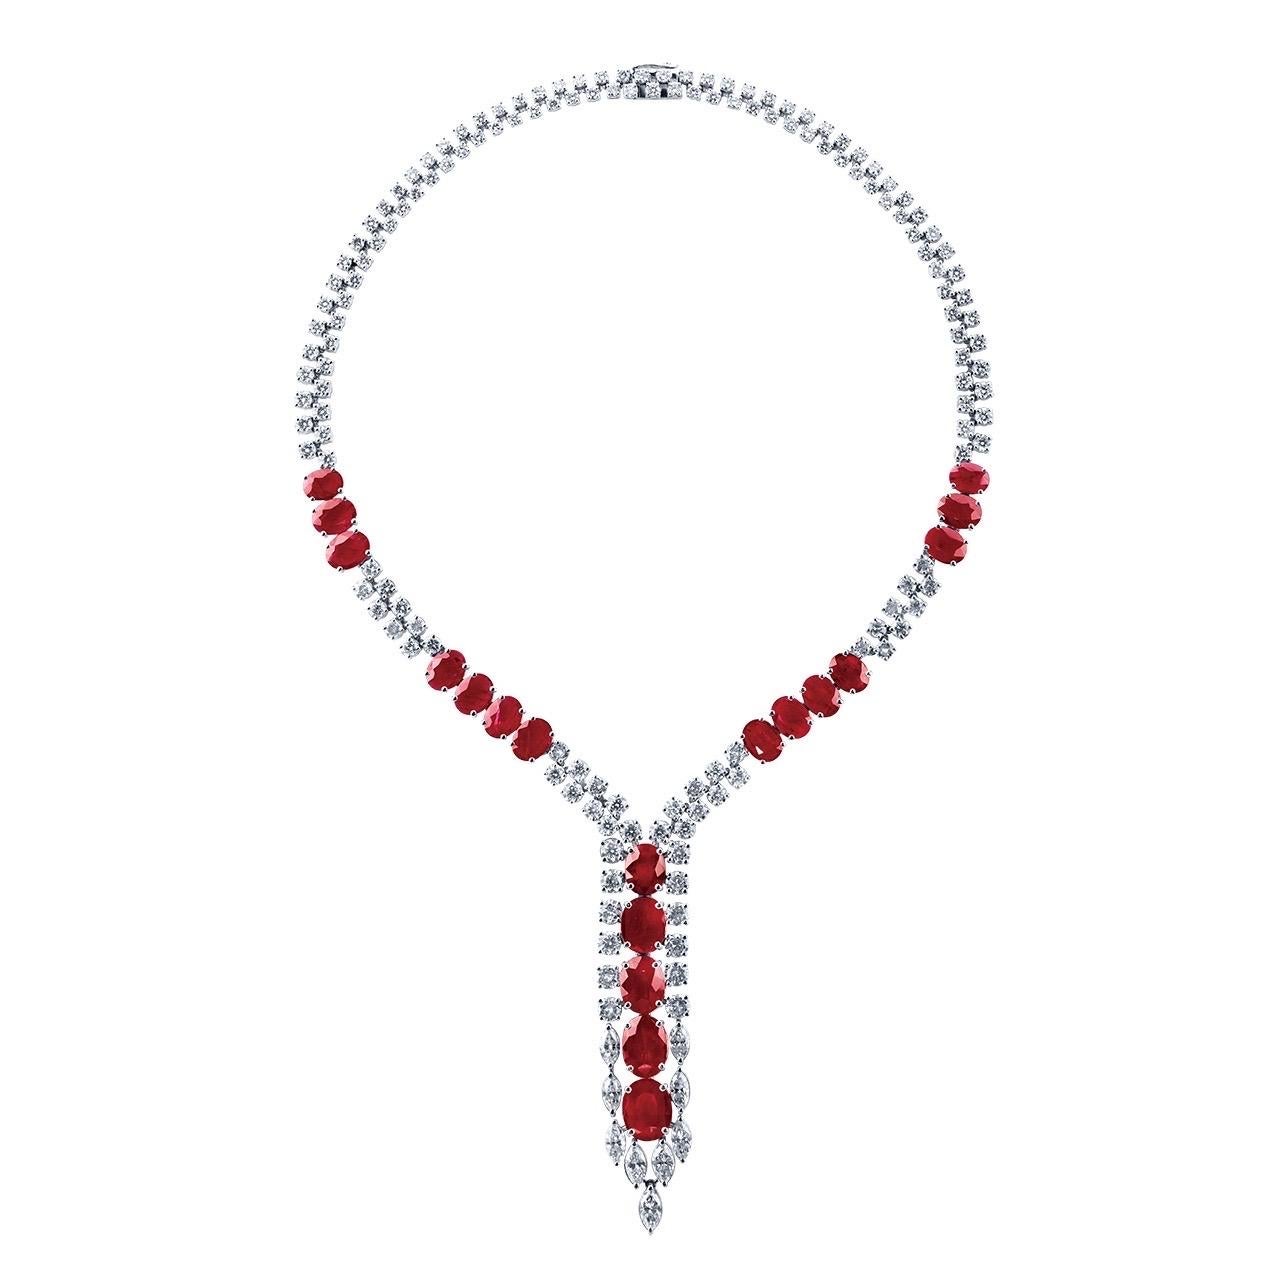 A selection of perfectly matched Mozambique rubies, all untreated and carefully selected to create this stunning investment necklace. 
Setting: white diamonds totaling approximately 22.22 carats, rubies totaling approximately 30.49 carats
From